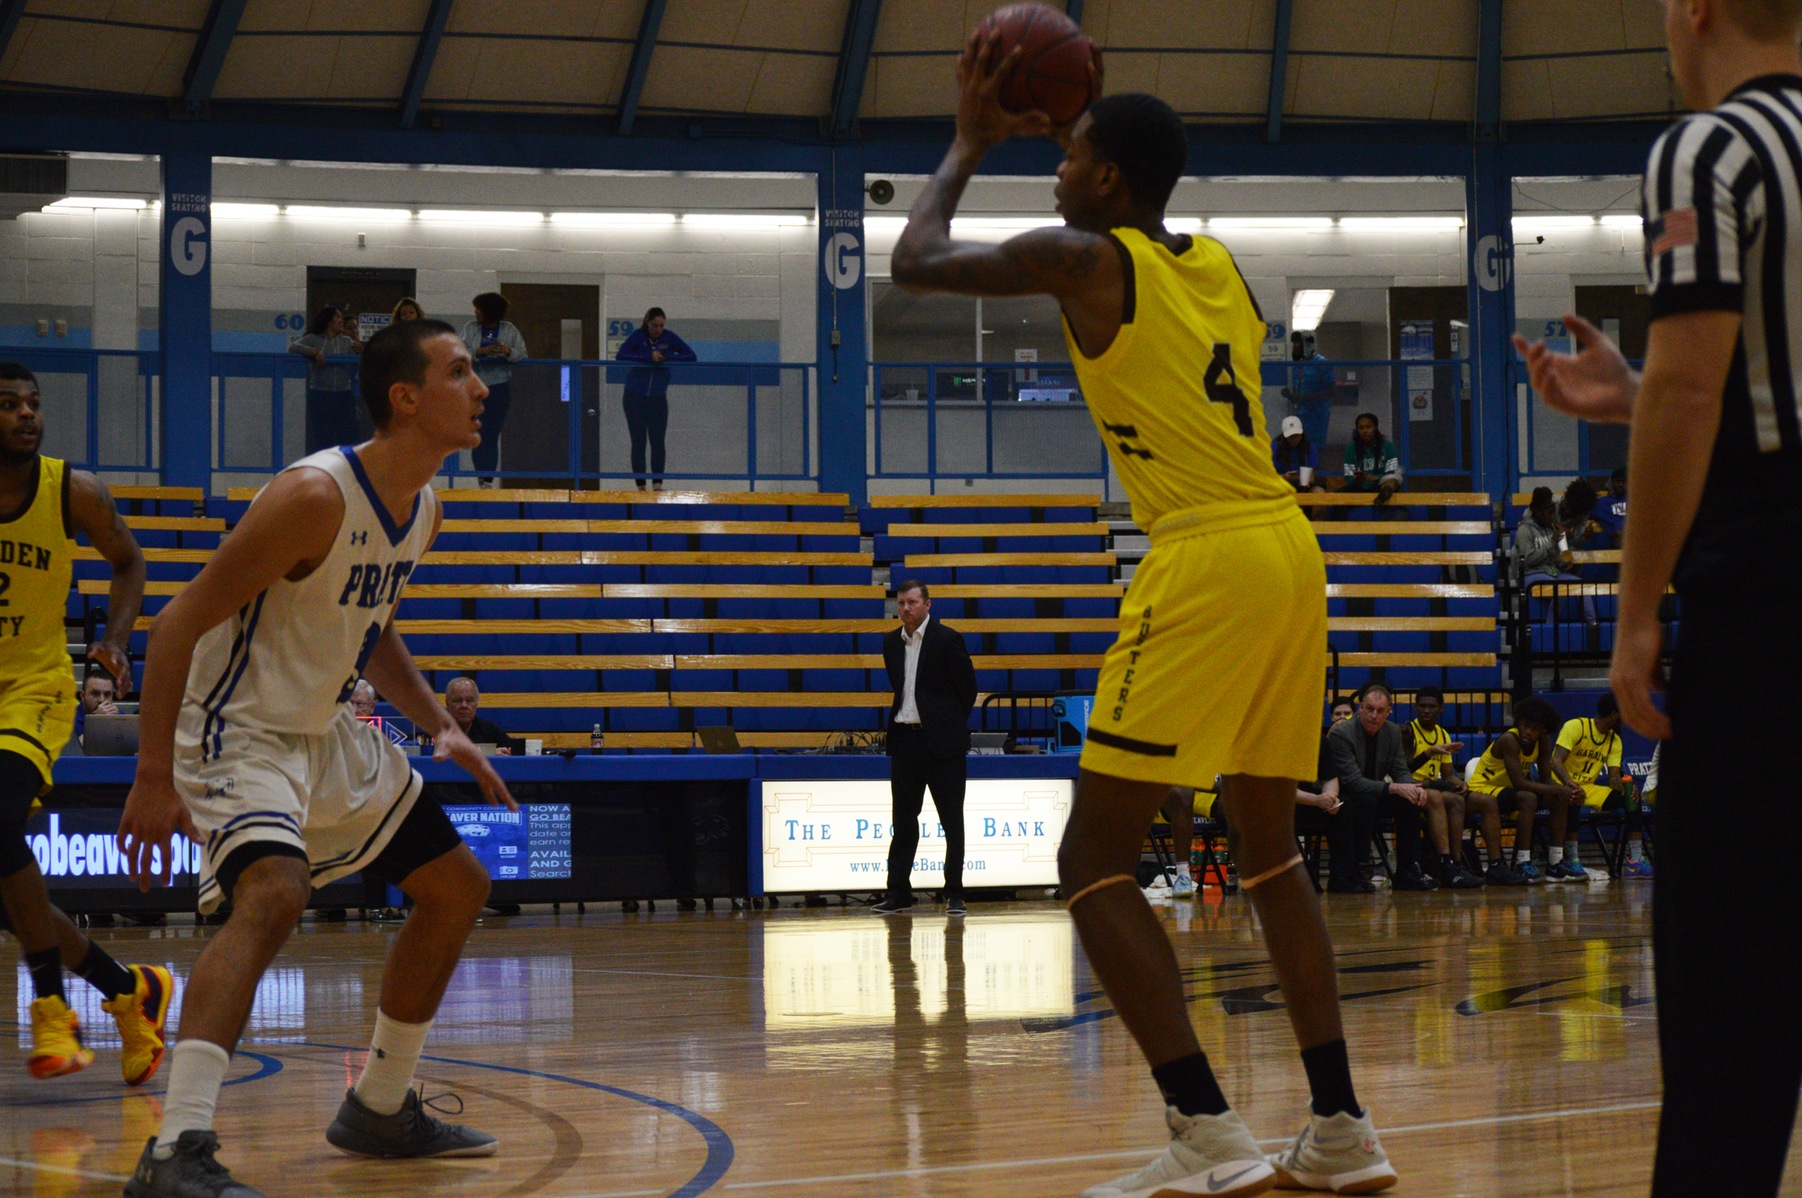 Broncbusters come storming back to beat Pratt in overtime